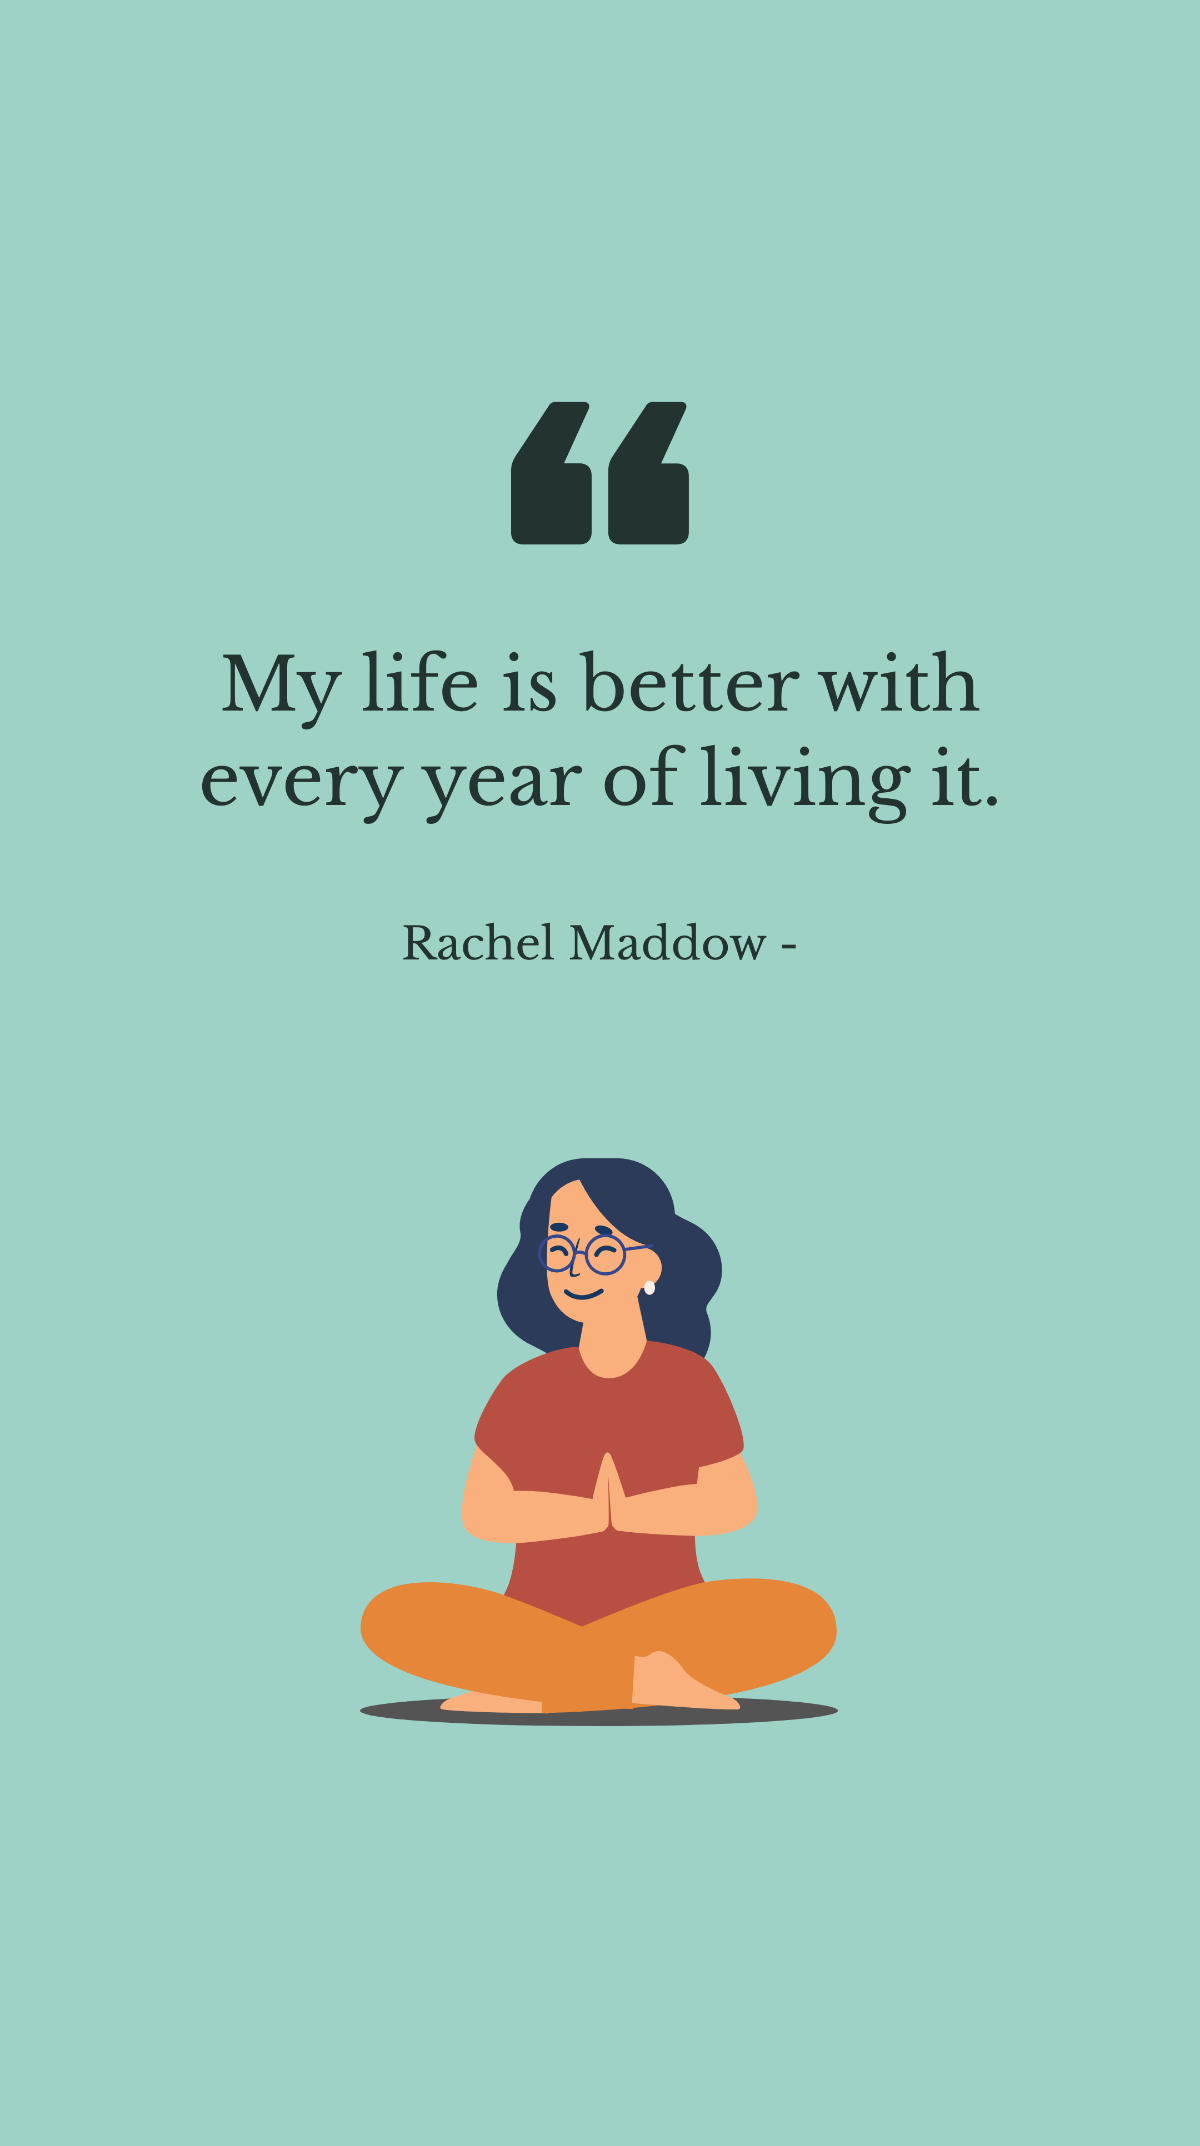 Rachel Maddow - My life is better with every year of living it. Template